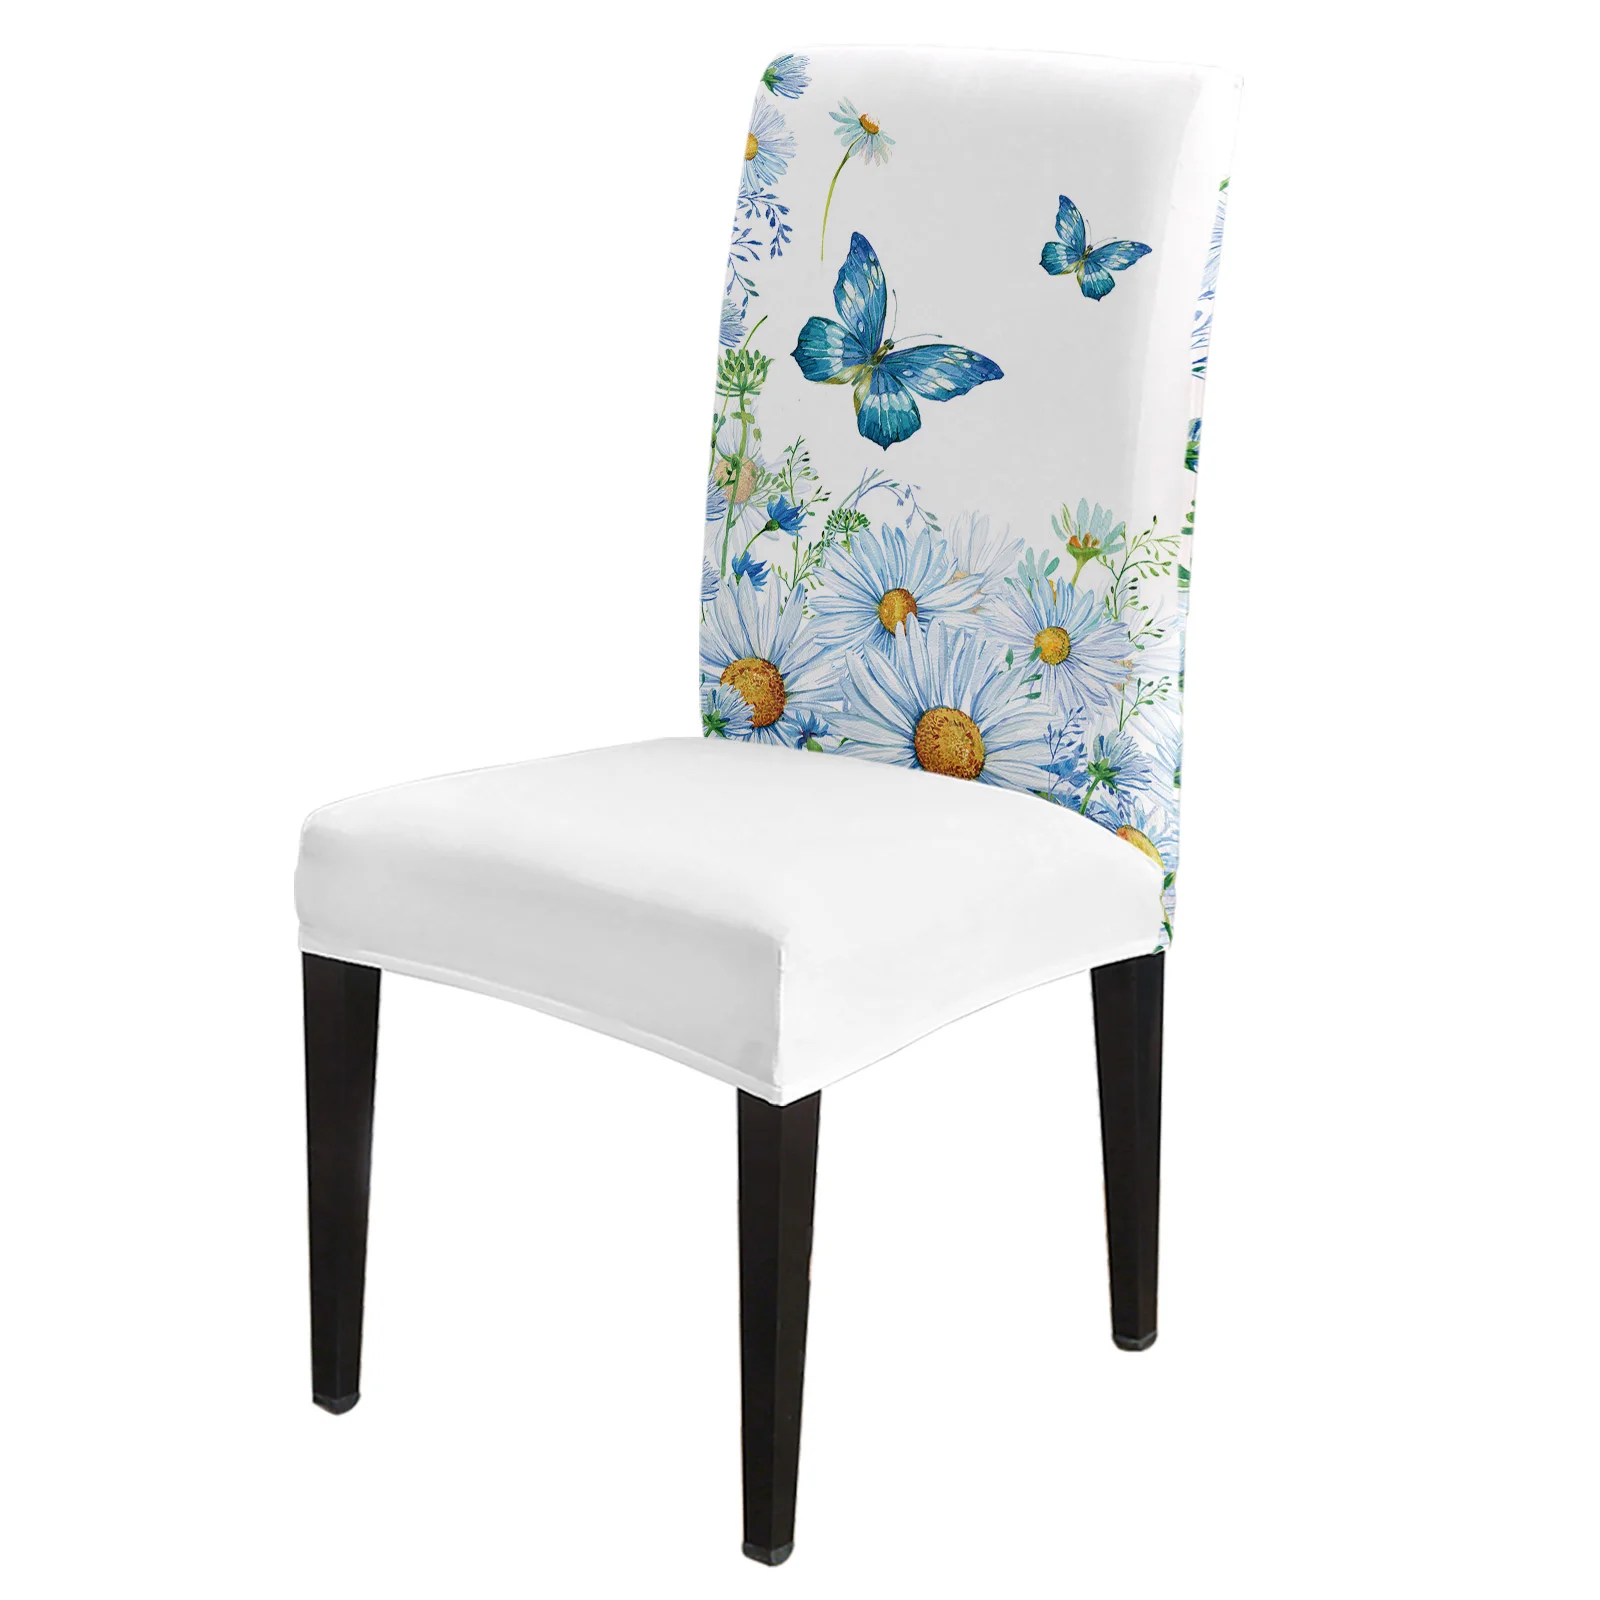 

Watercolor Flowers Daisy Butterfly Dining Chair Cover 4/6/8PCS Spandex Elastic Chair Slipcover Case for Wedding Home Dining Room